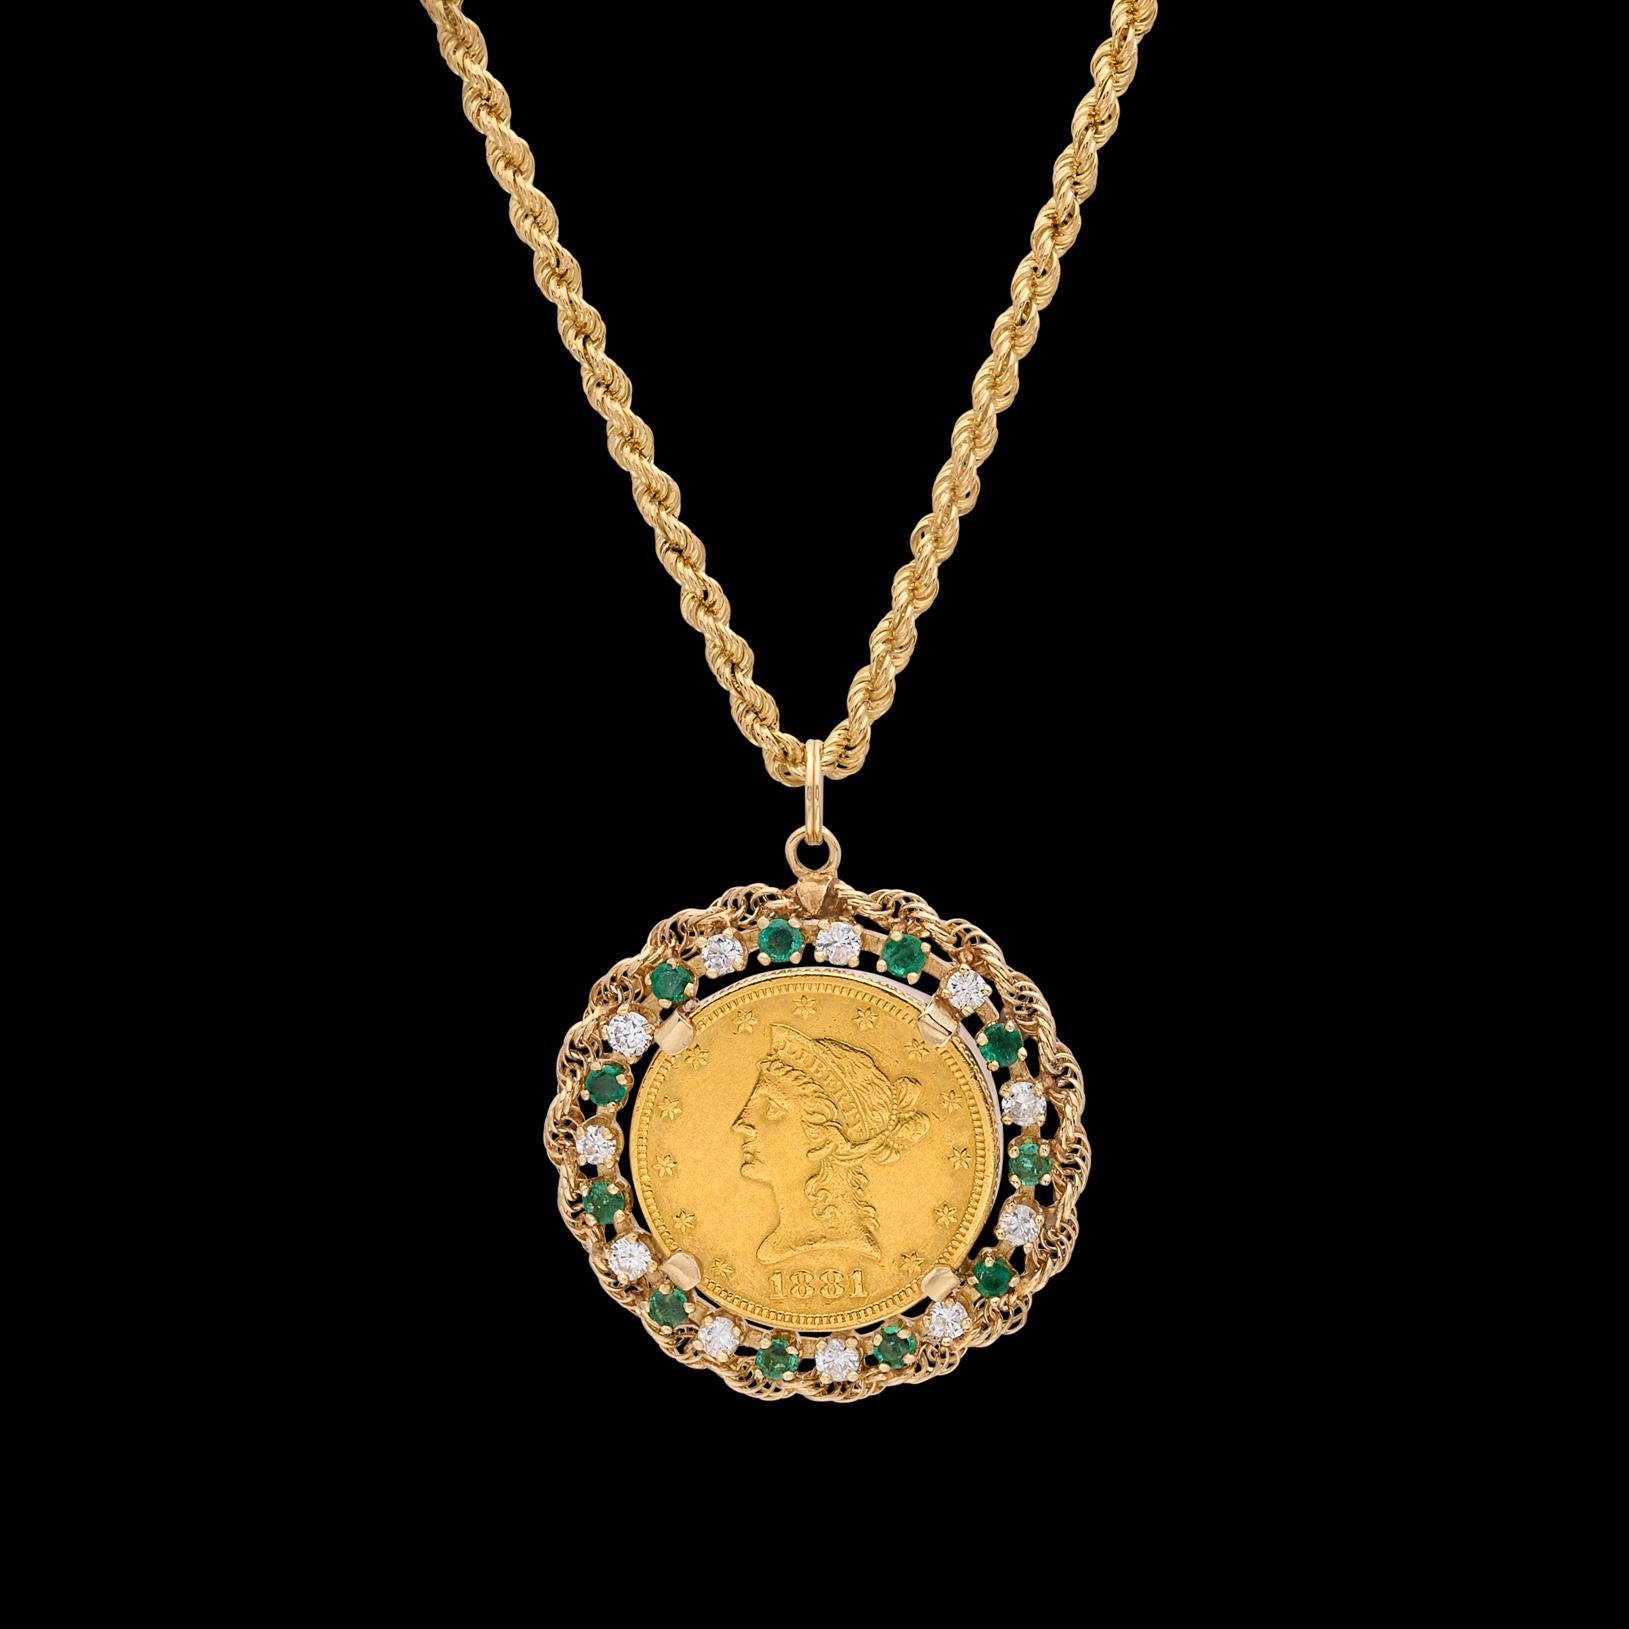 Circa 1970's, the 14k pendant features an 1881 US $10 Liberty Head gold coin, surrounded by 11 round-cut emeralds and 11 round brilliant-cut diamonds, weighing an estimated 1.20 carats, with a rope frame, and suspended from a 30-in. 14k gold rope